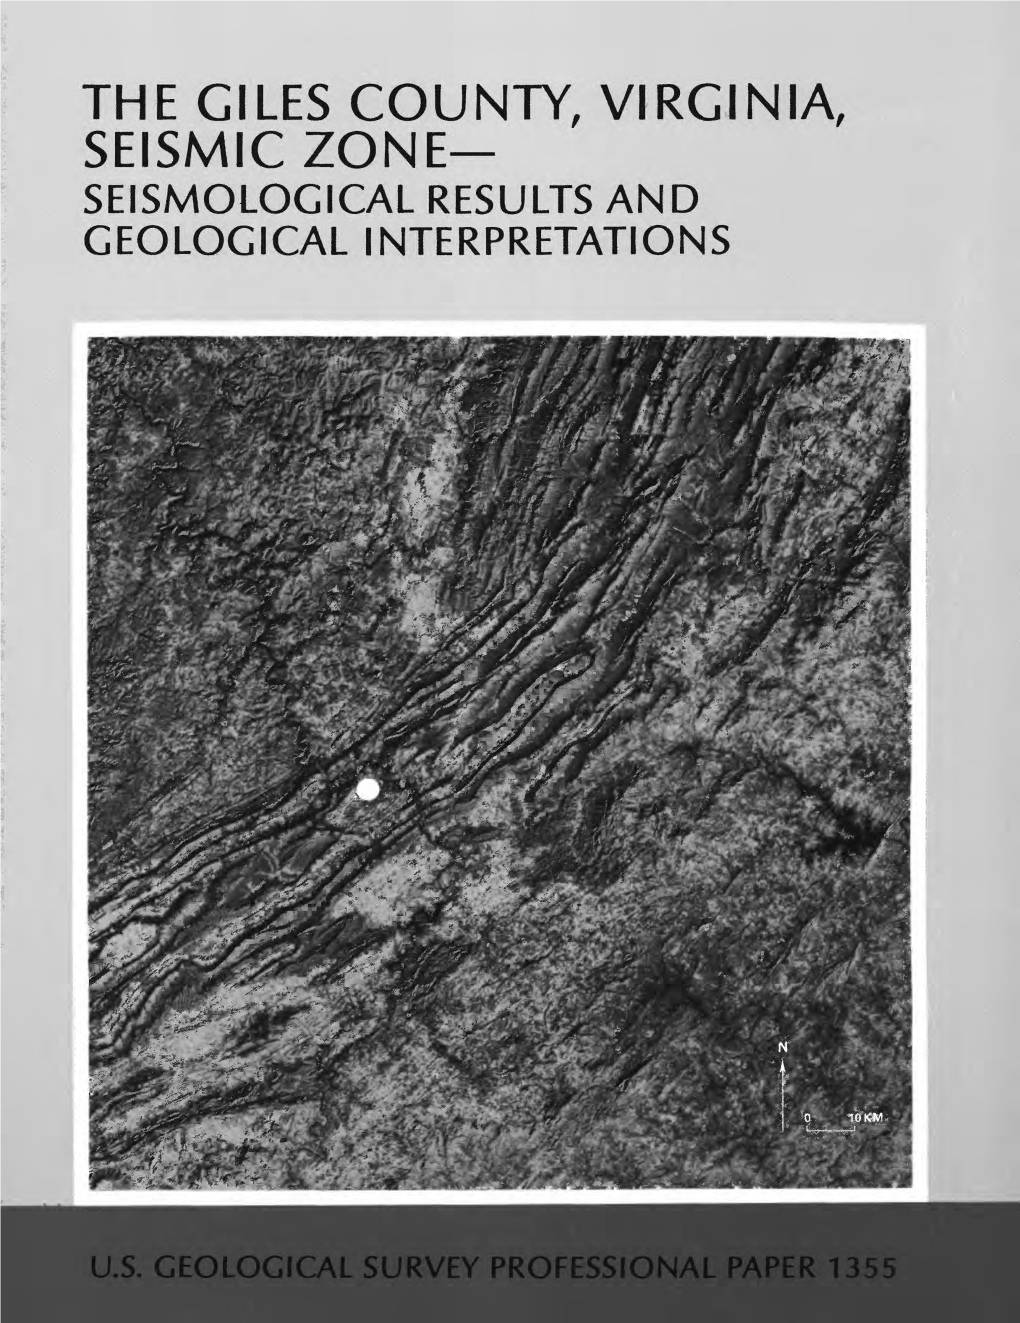 The Giles County, Virginia, Seismic Zone Seismological Results and Geological Interpretations